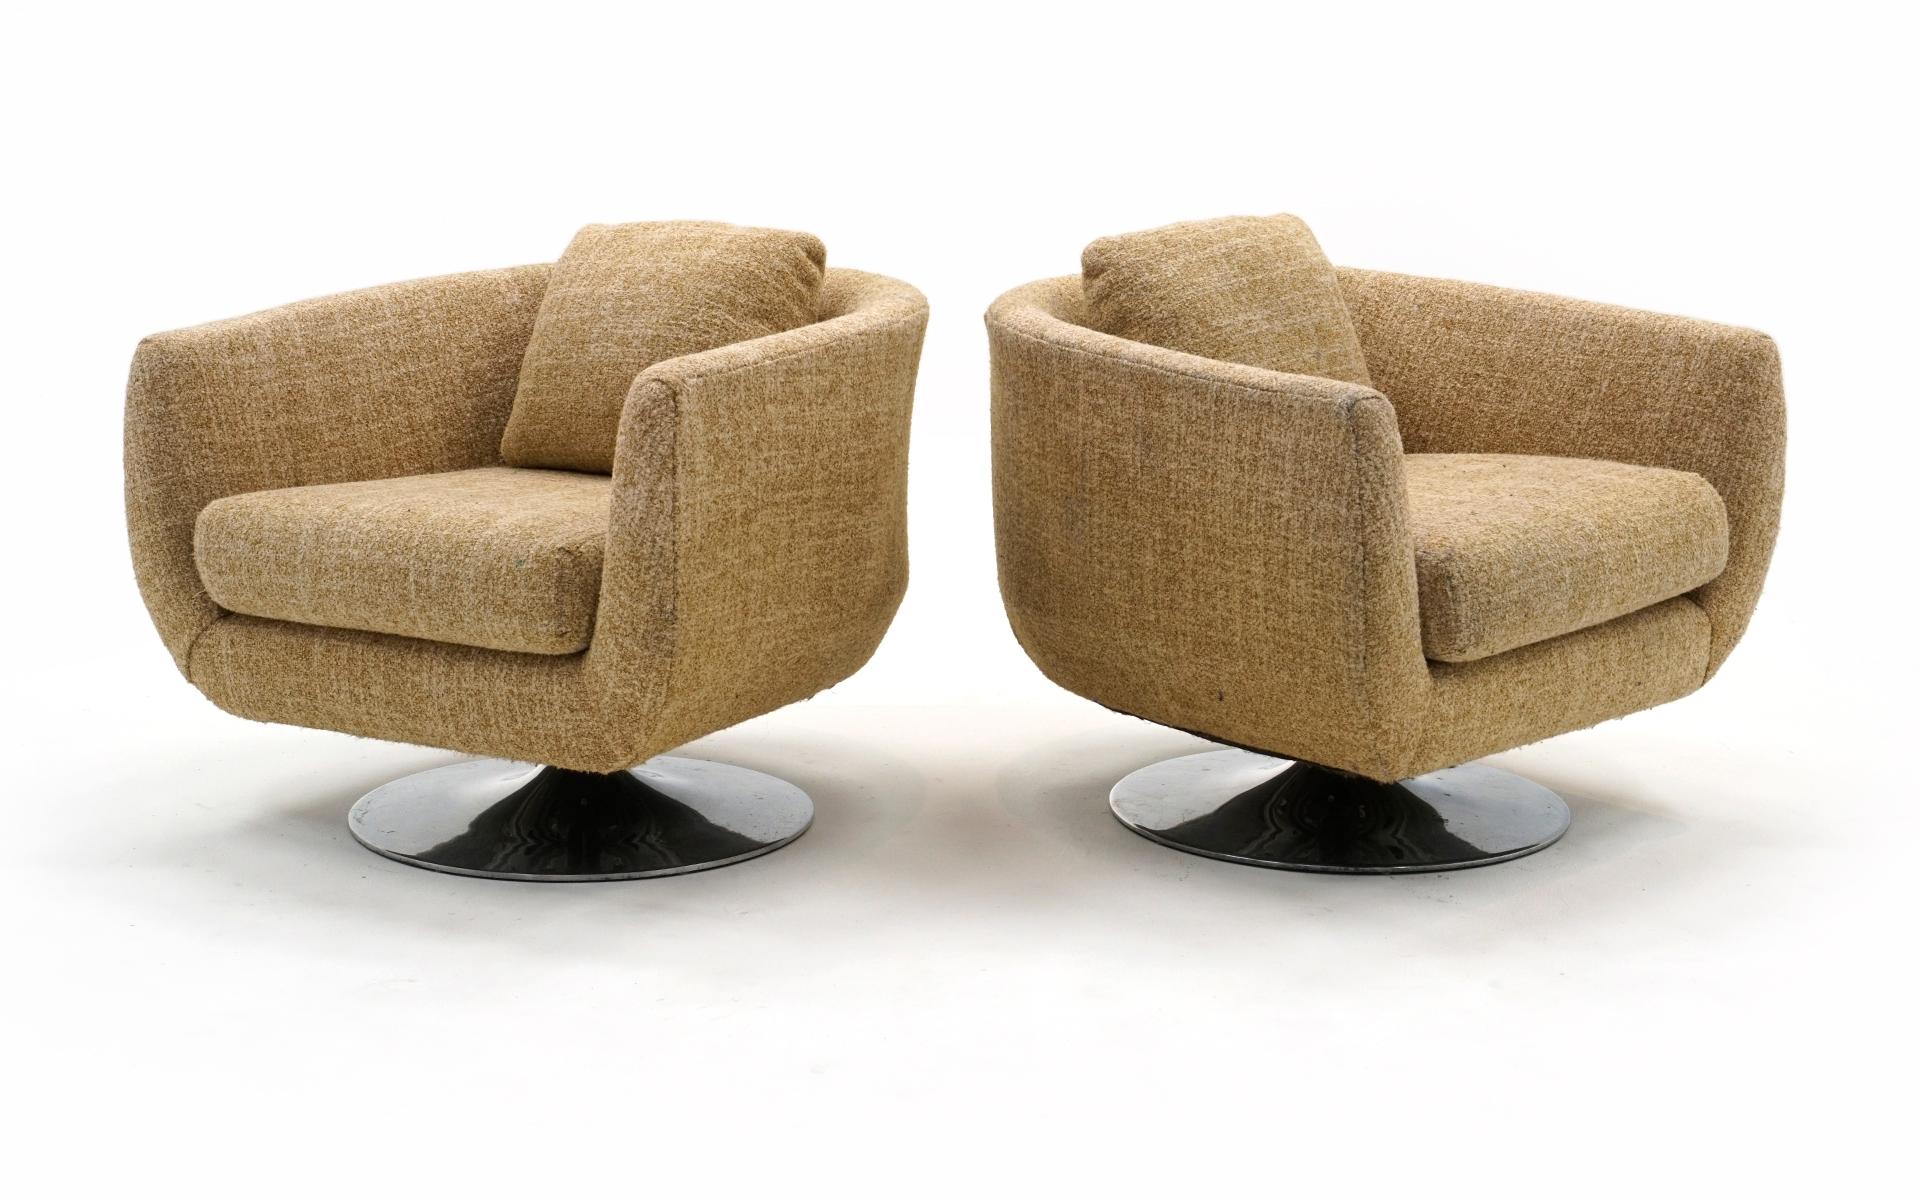 Two barrel back even arm swivel lounge chairs in the style of Milo Baughman for Thayer Coggin. Very well constructed, sturdy and comfortable, the chairs rest on cast aluminum tulip bases. We expect the buyer will want to reupholster these chairs so